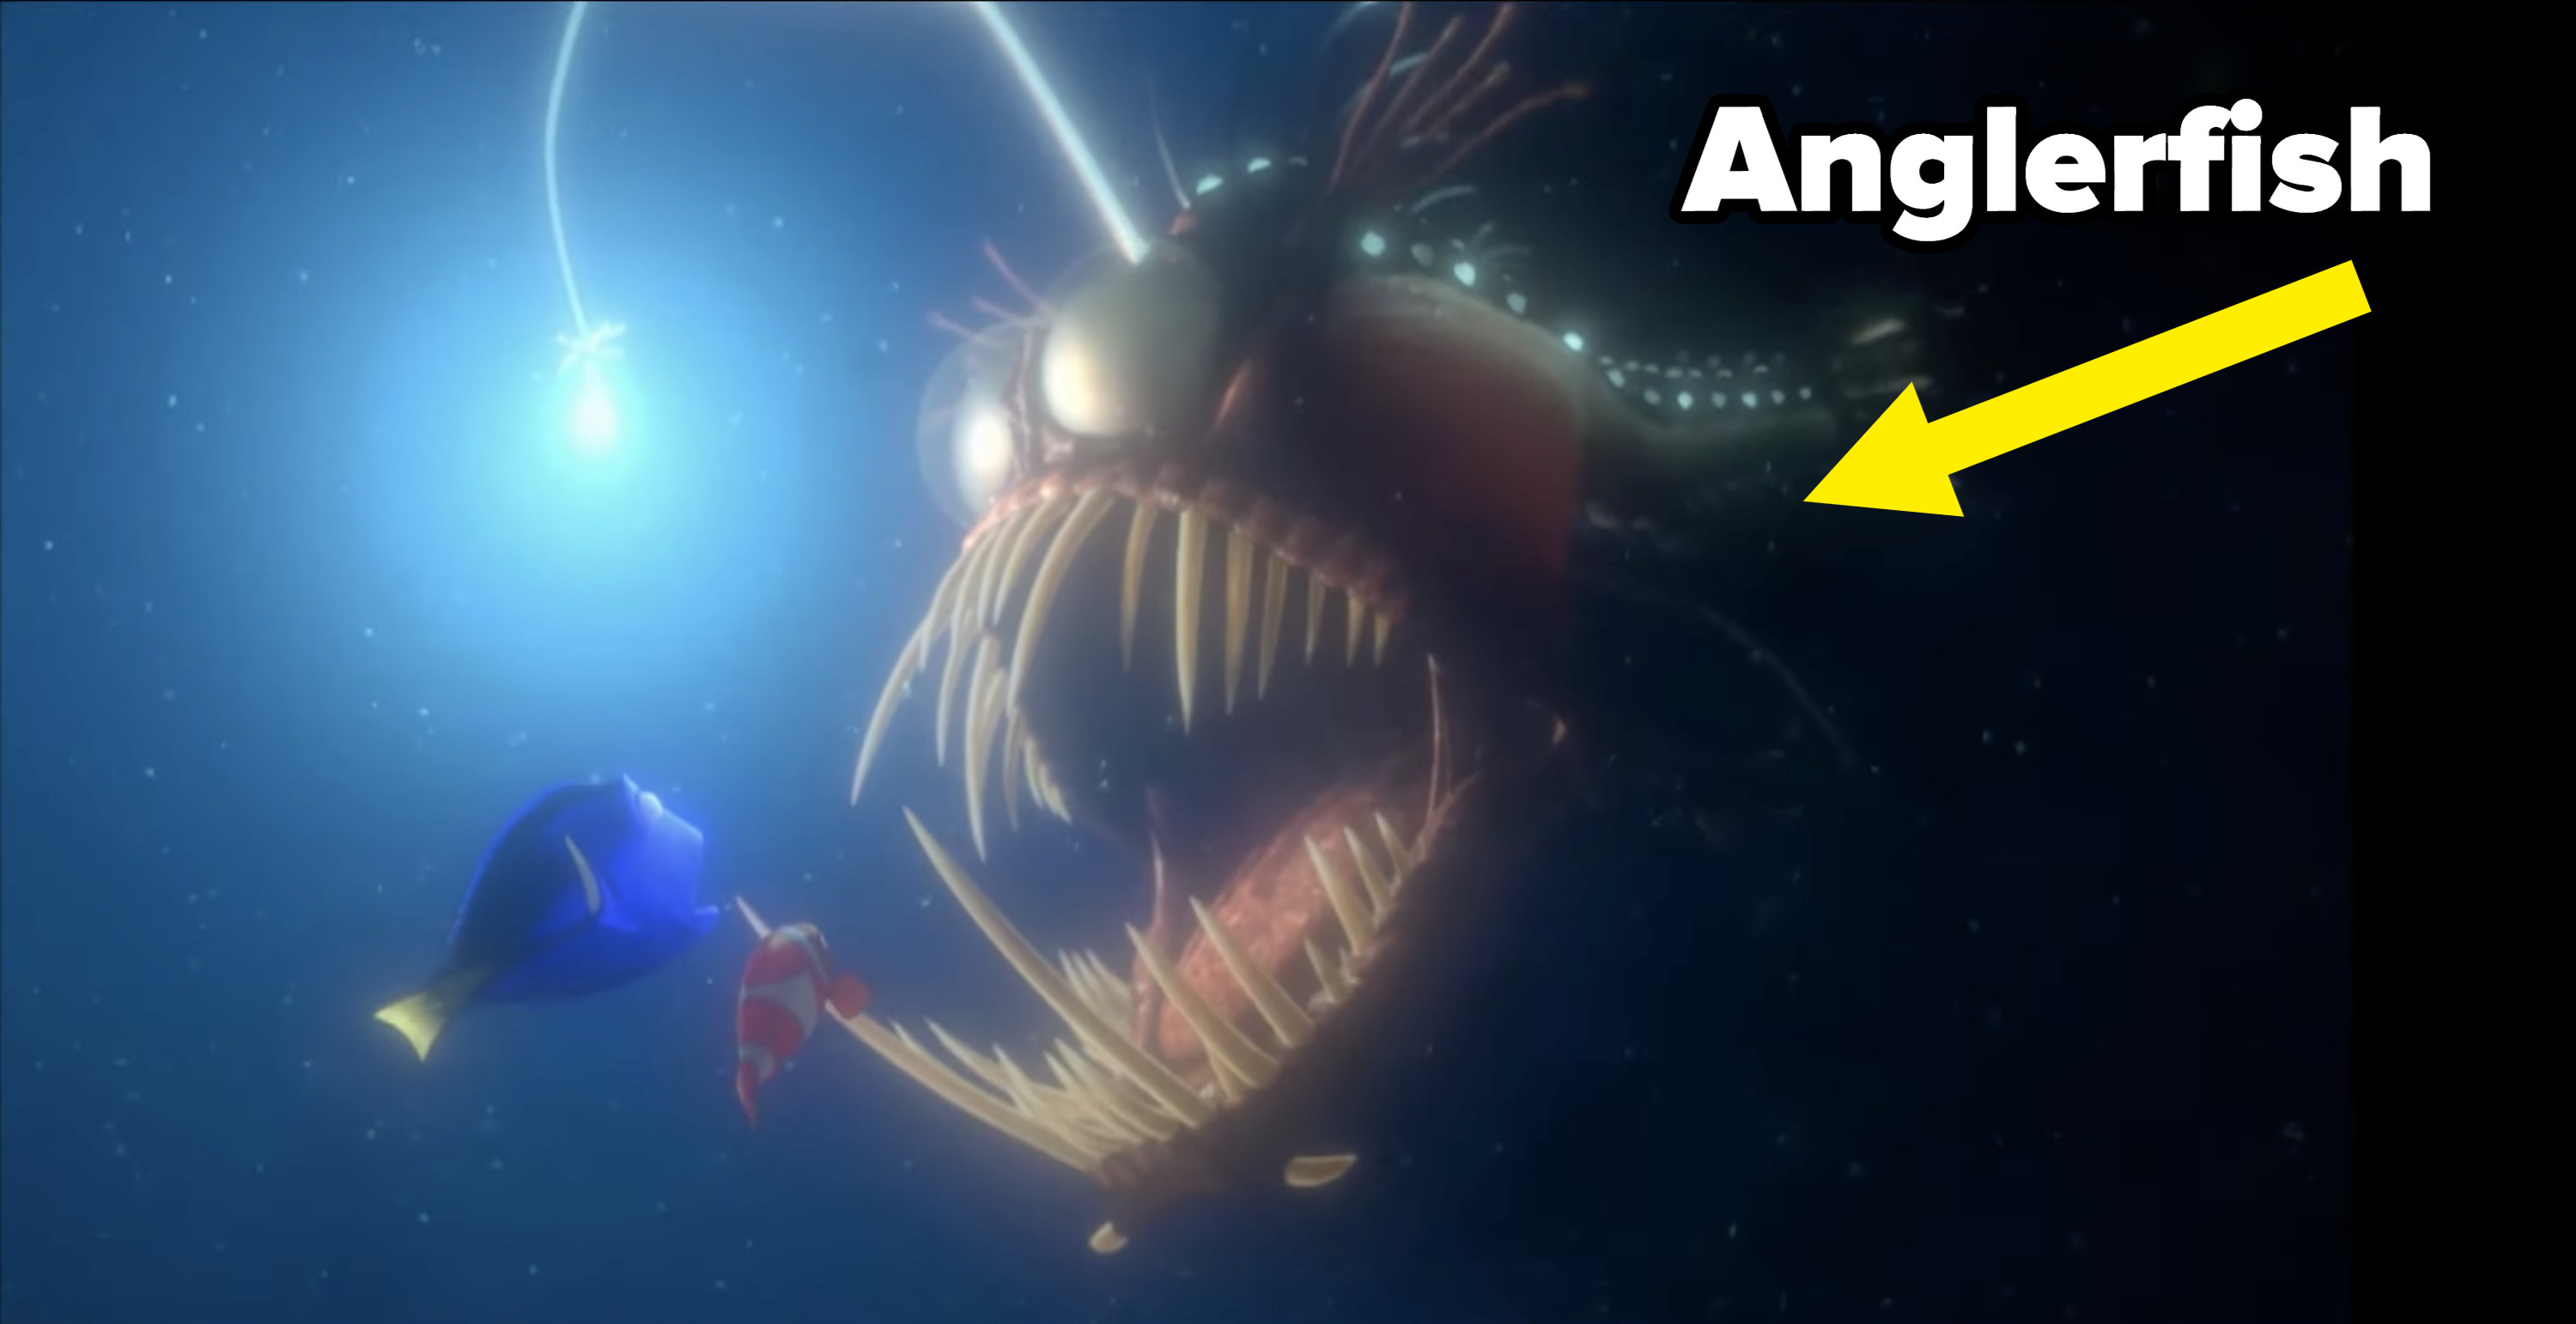 The hovering light is attached to an anglerfish